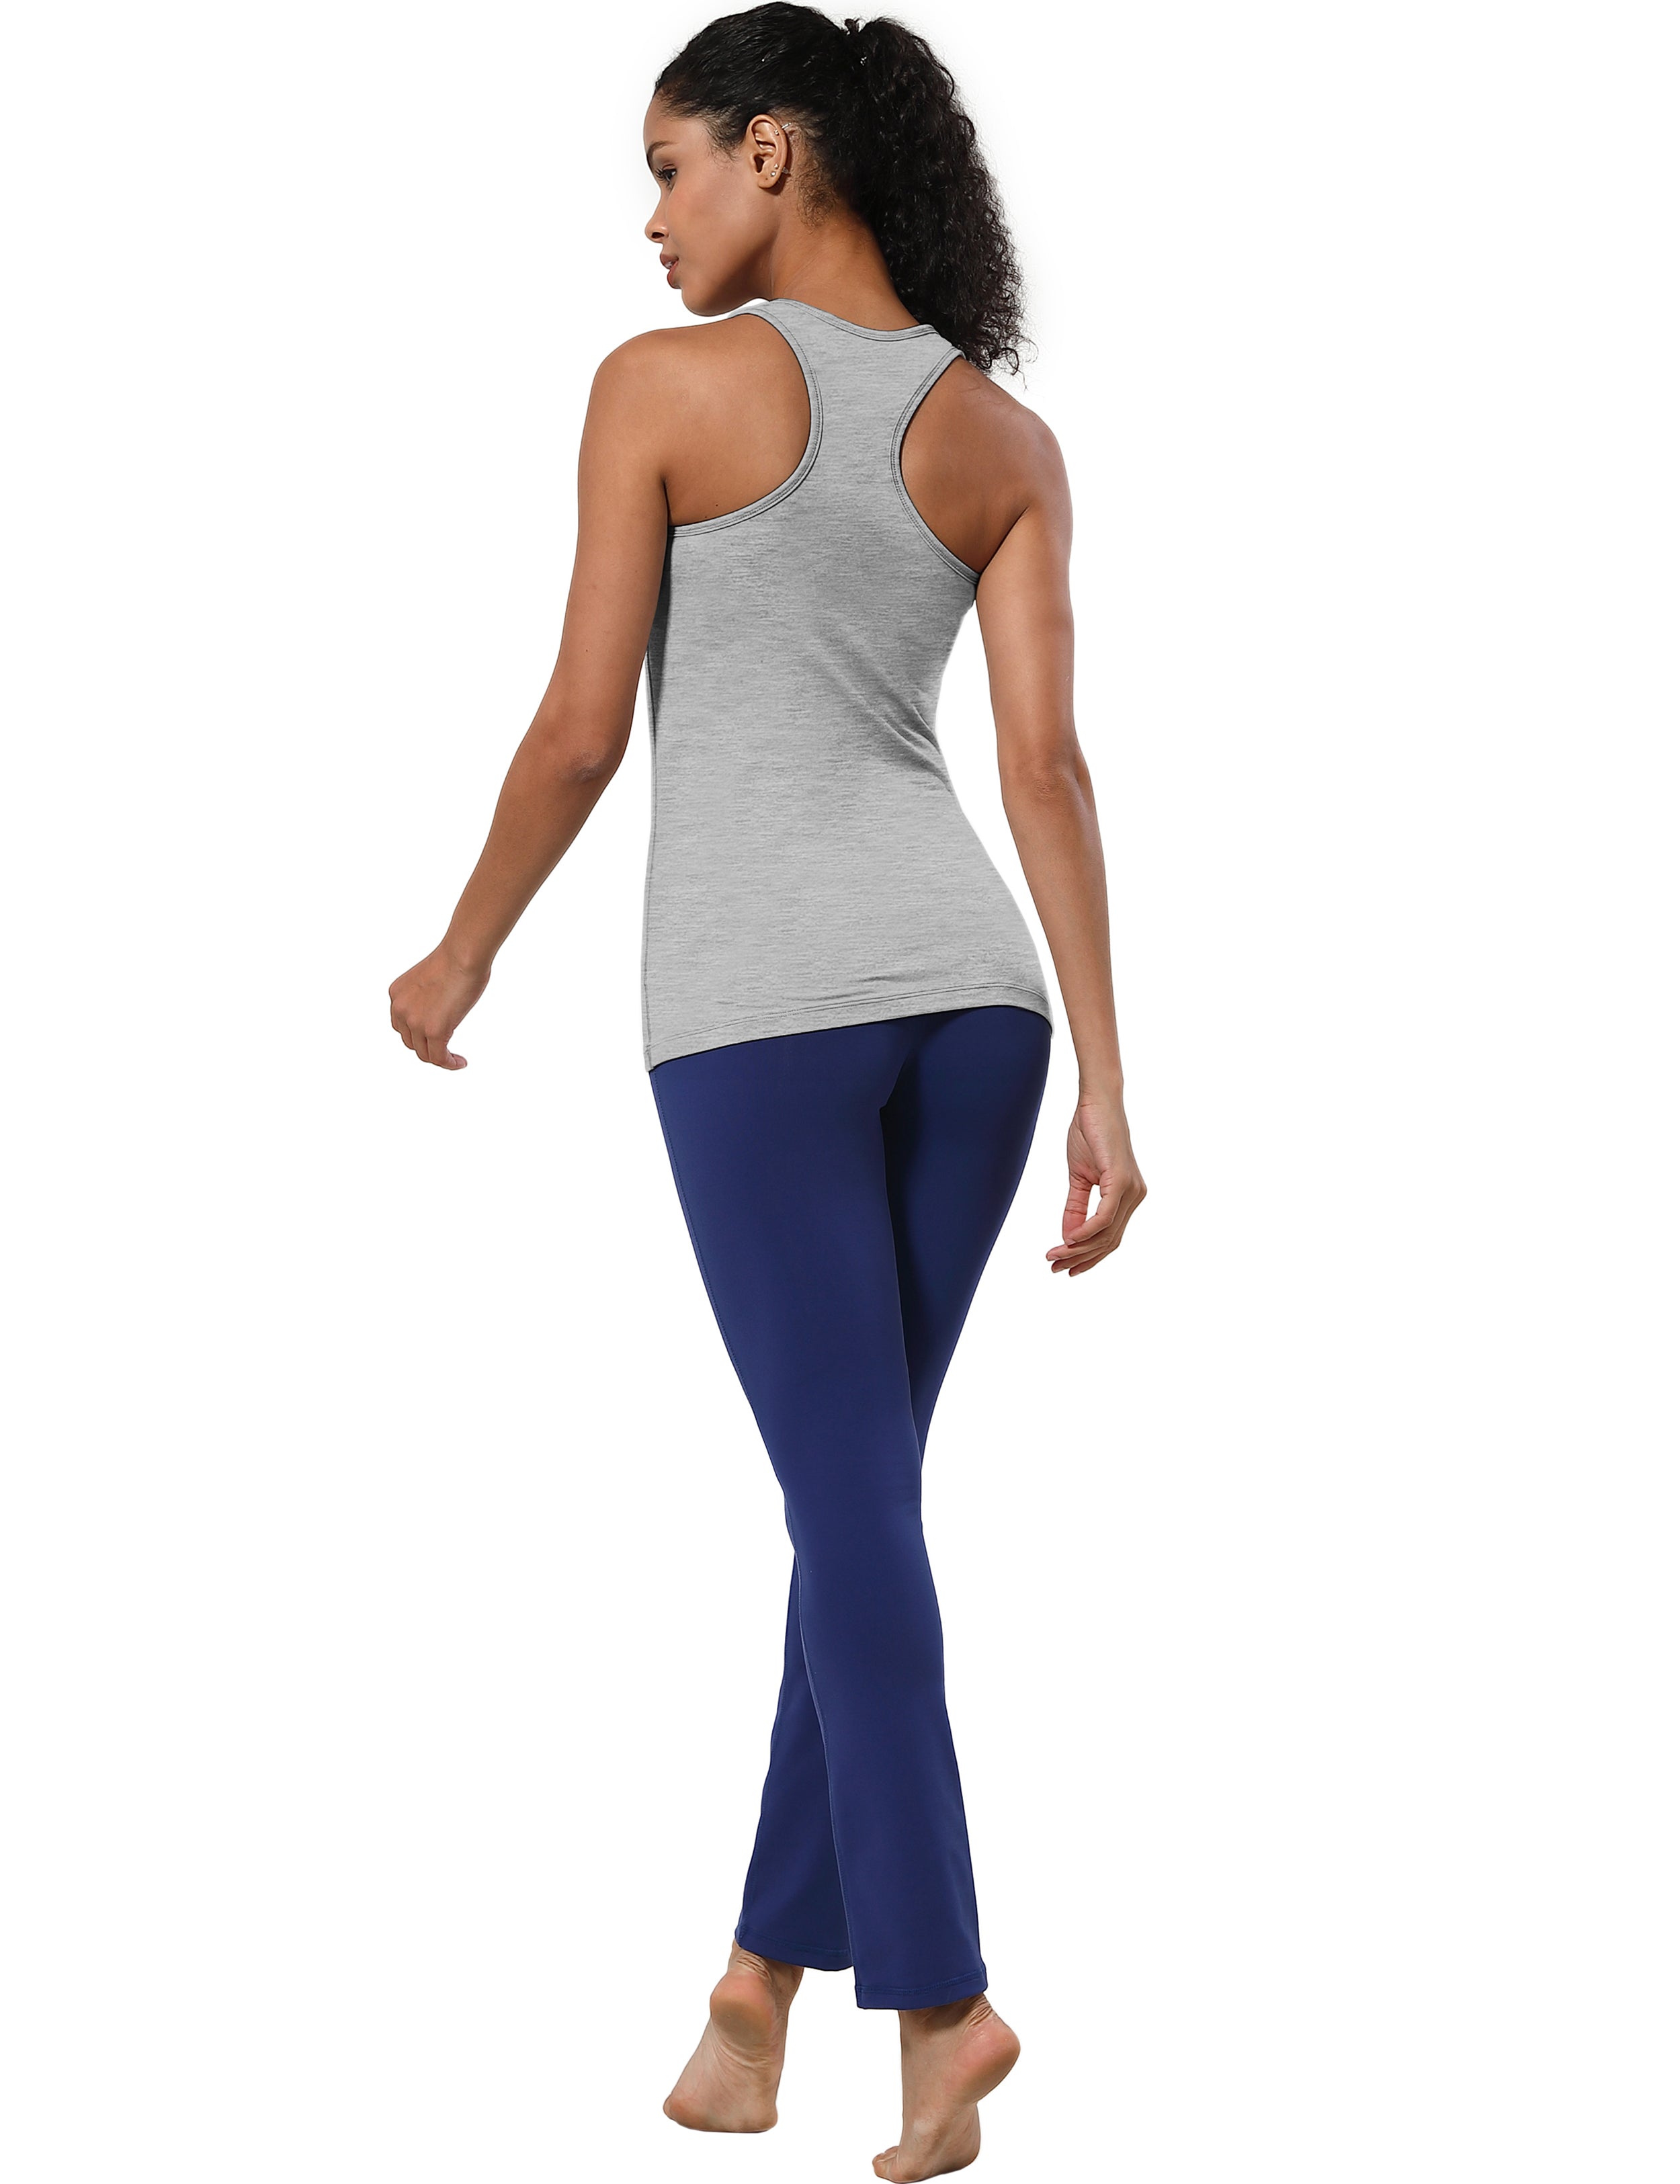 Racerback Athletic Tank Tops heathergray 92%Nylon/8%Spandex(Cotton Soft) Designed for Pilates Tight Fit So buttery soft, it feels weightless Sweat-wicking Four-way stretch Breathable Contours your body Sits below the waistband for moderate, everyday coverage